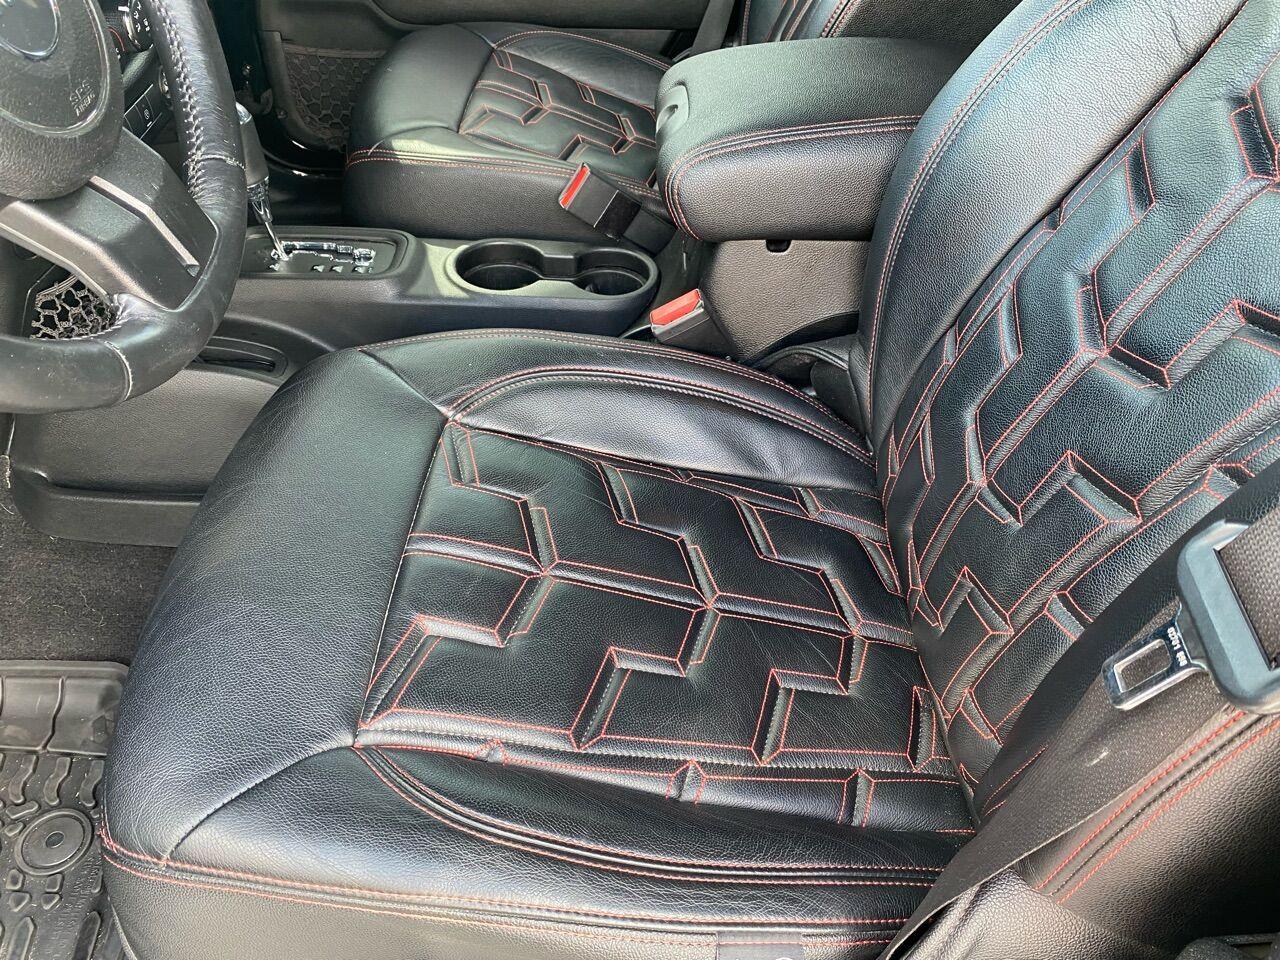 Seat Risers -Mounts 1 Bucket Seats Or 1 Bench Seats 2.5 To 3-3/4 Height  Adjustment